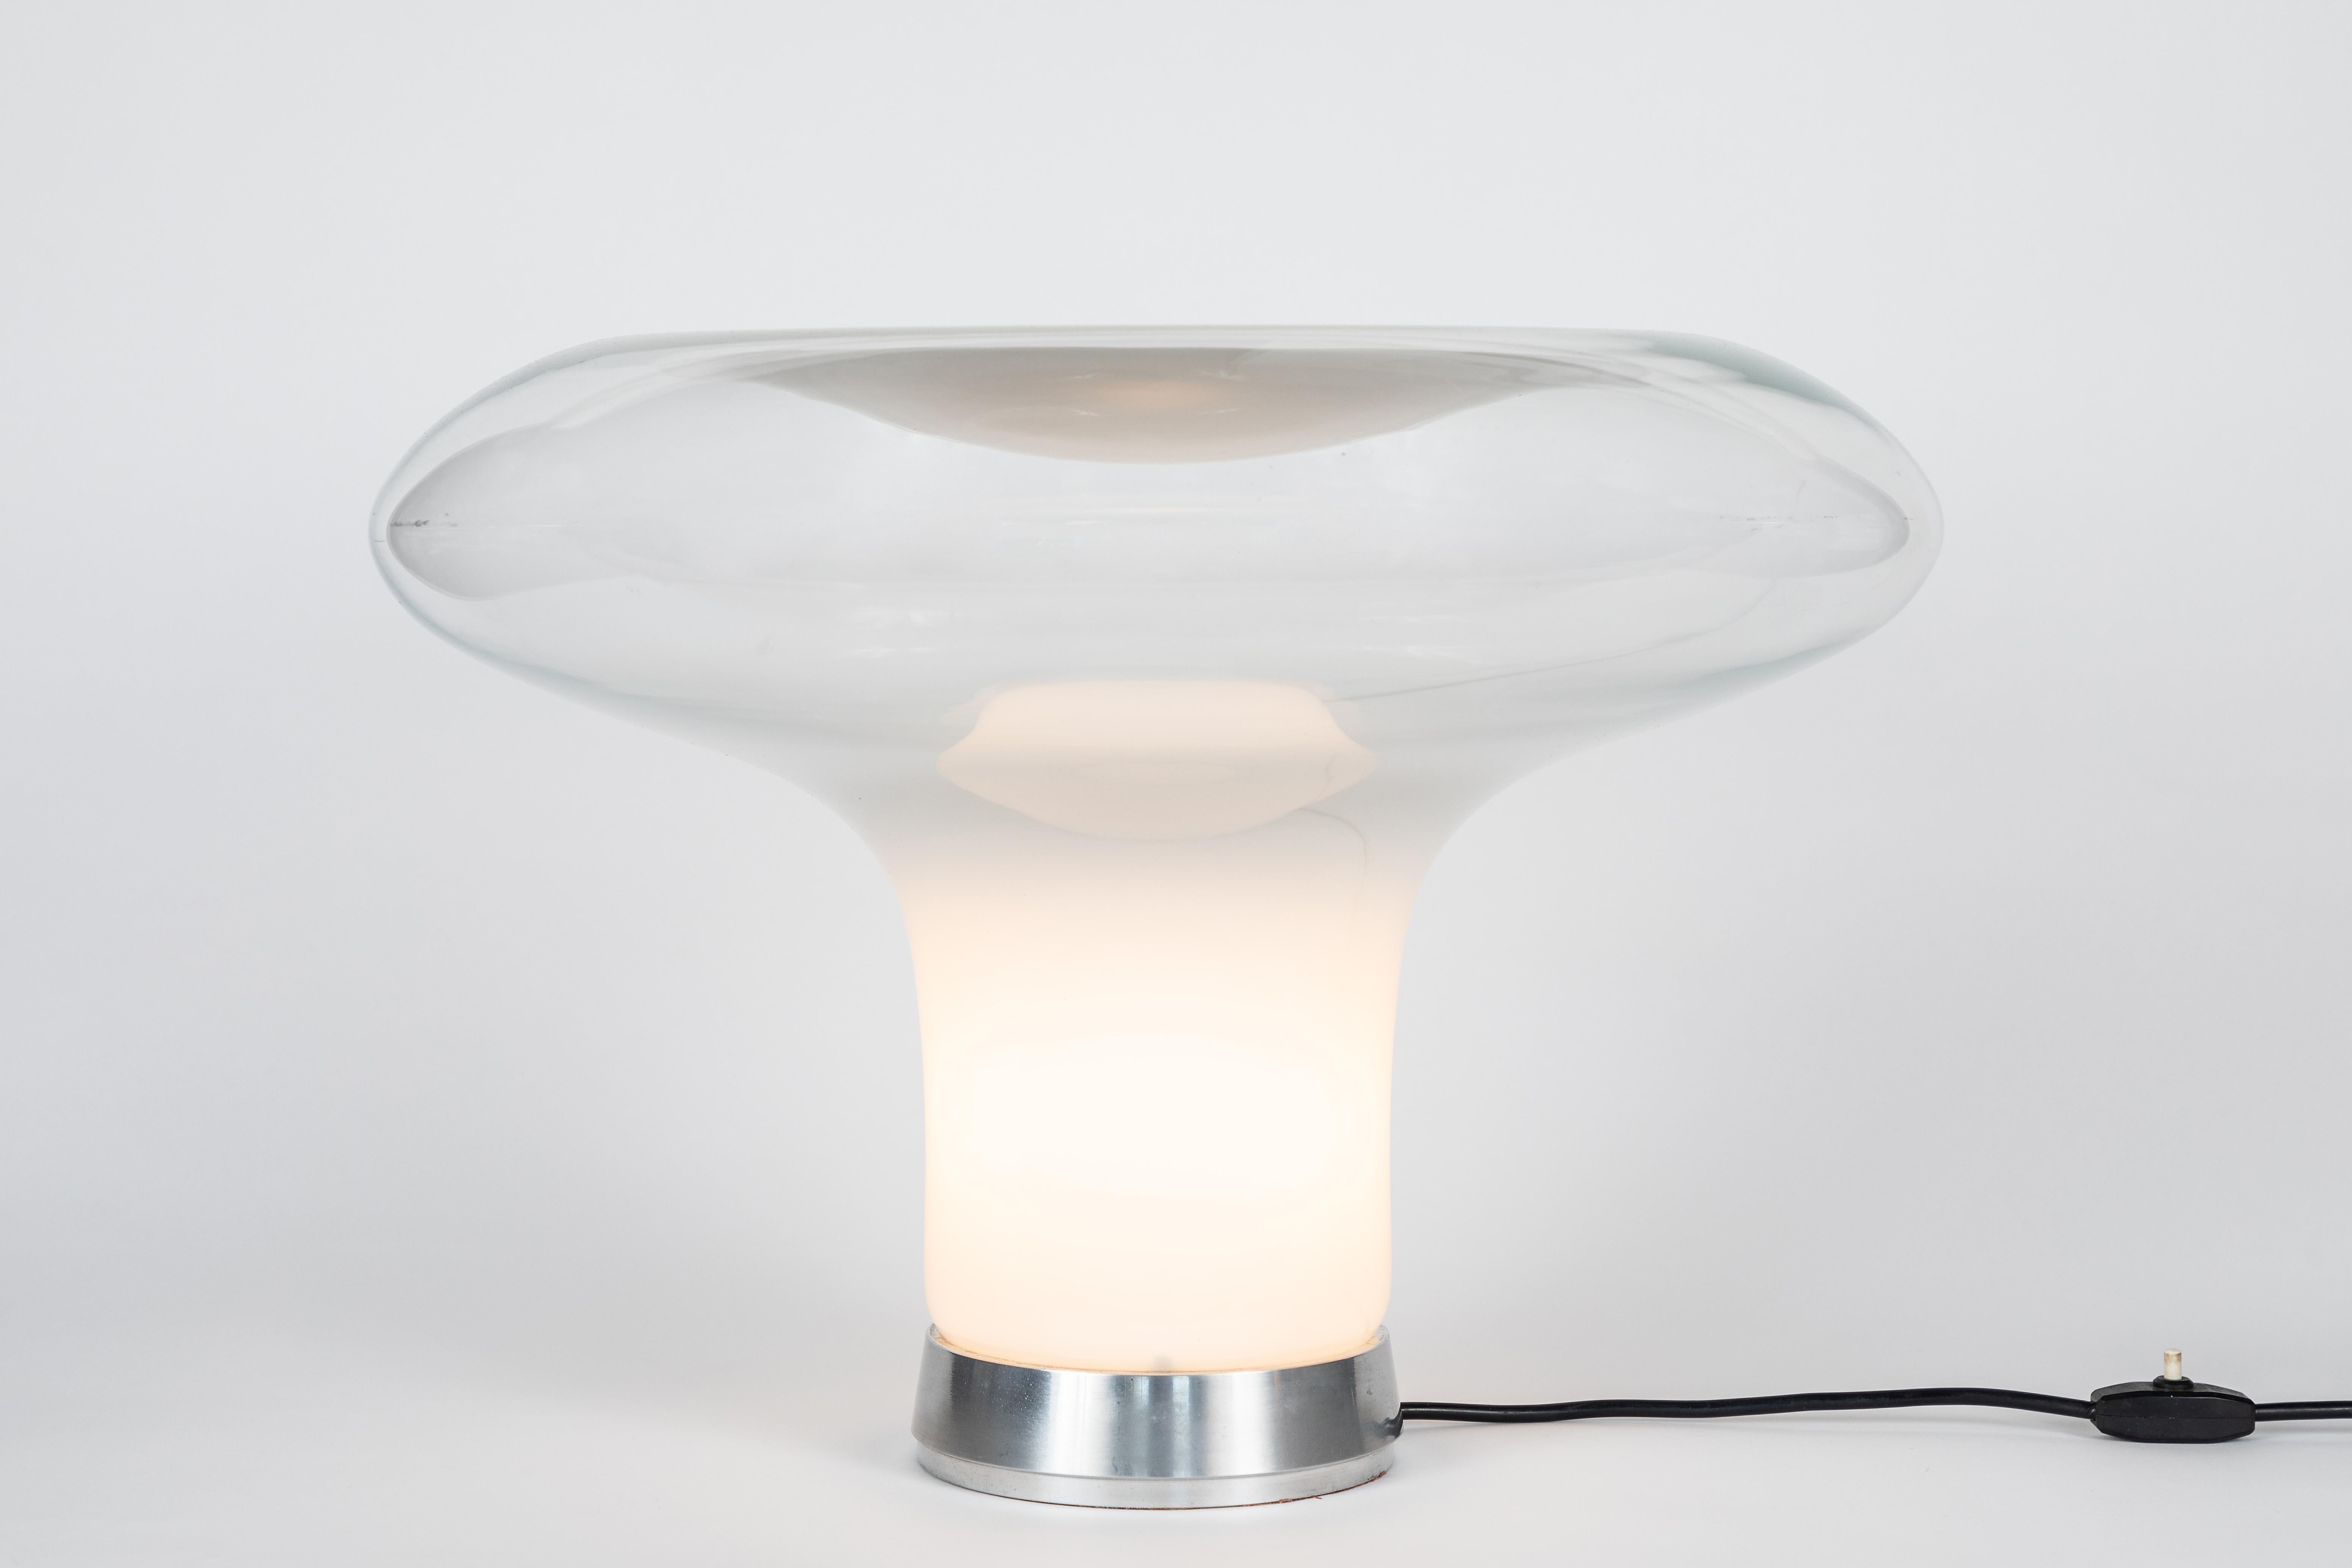 Large 1960s Angelo Mangiarotti 'Lesbo' table lamp for Artemide. A highly sculptural form of impressive scale, executed in metal and hand blown clear and opaline glass.
 
Not UL listed, but recommended UL listing possible from authorized 3rd party